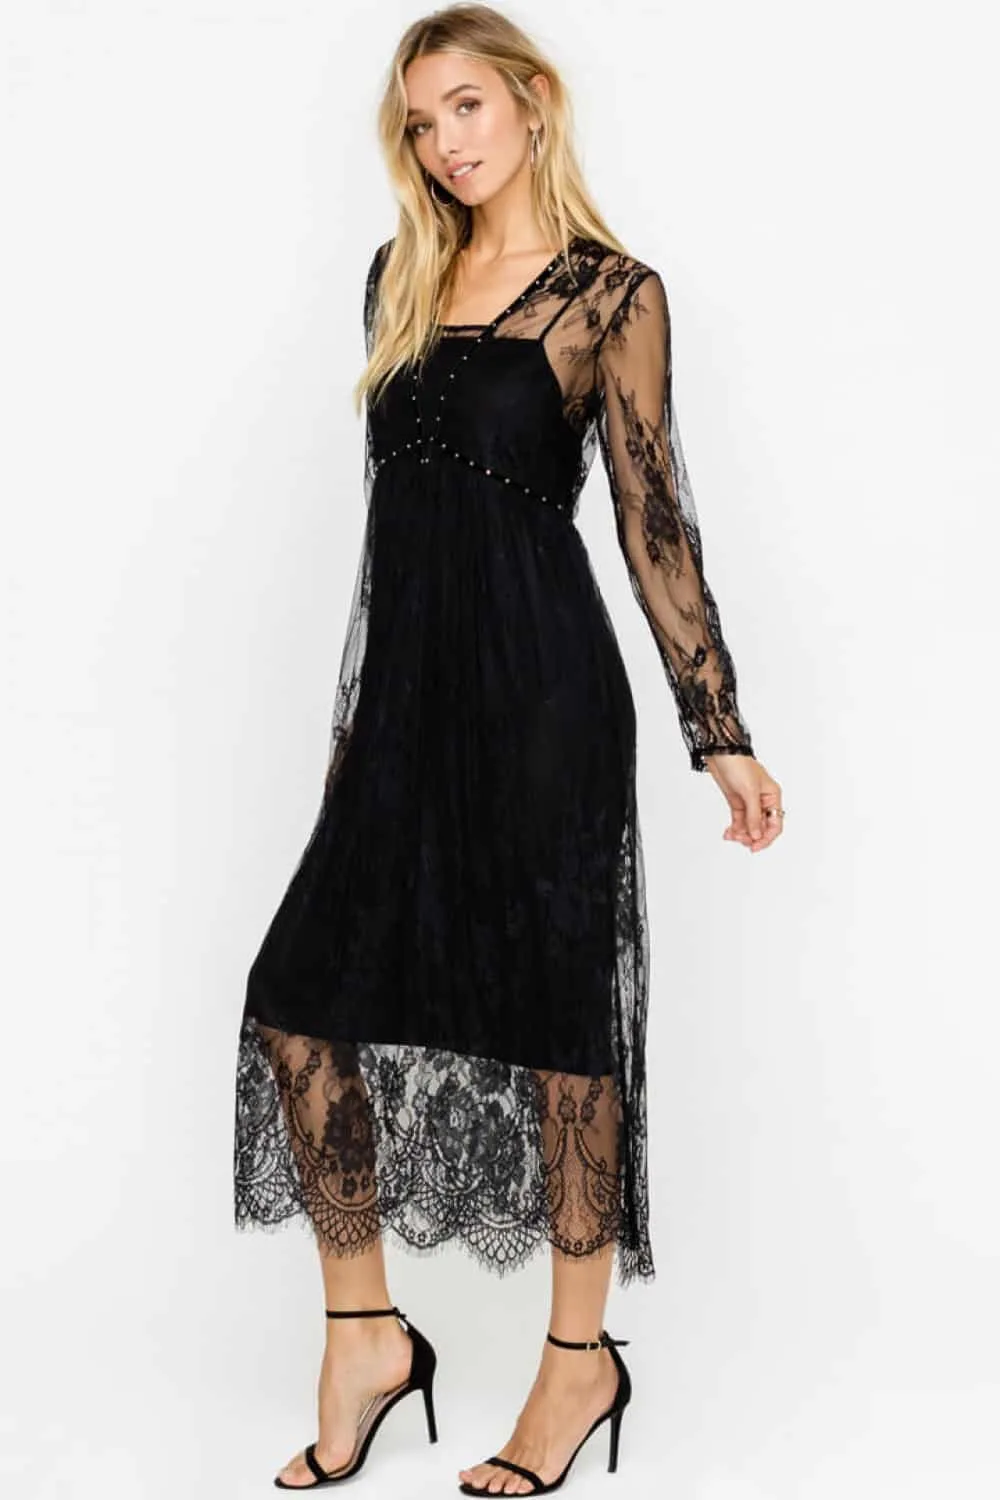 Black cocktail wear with lace detail